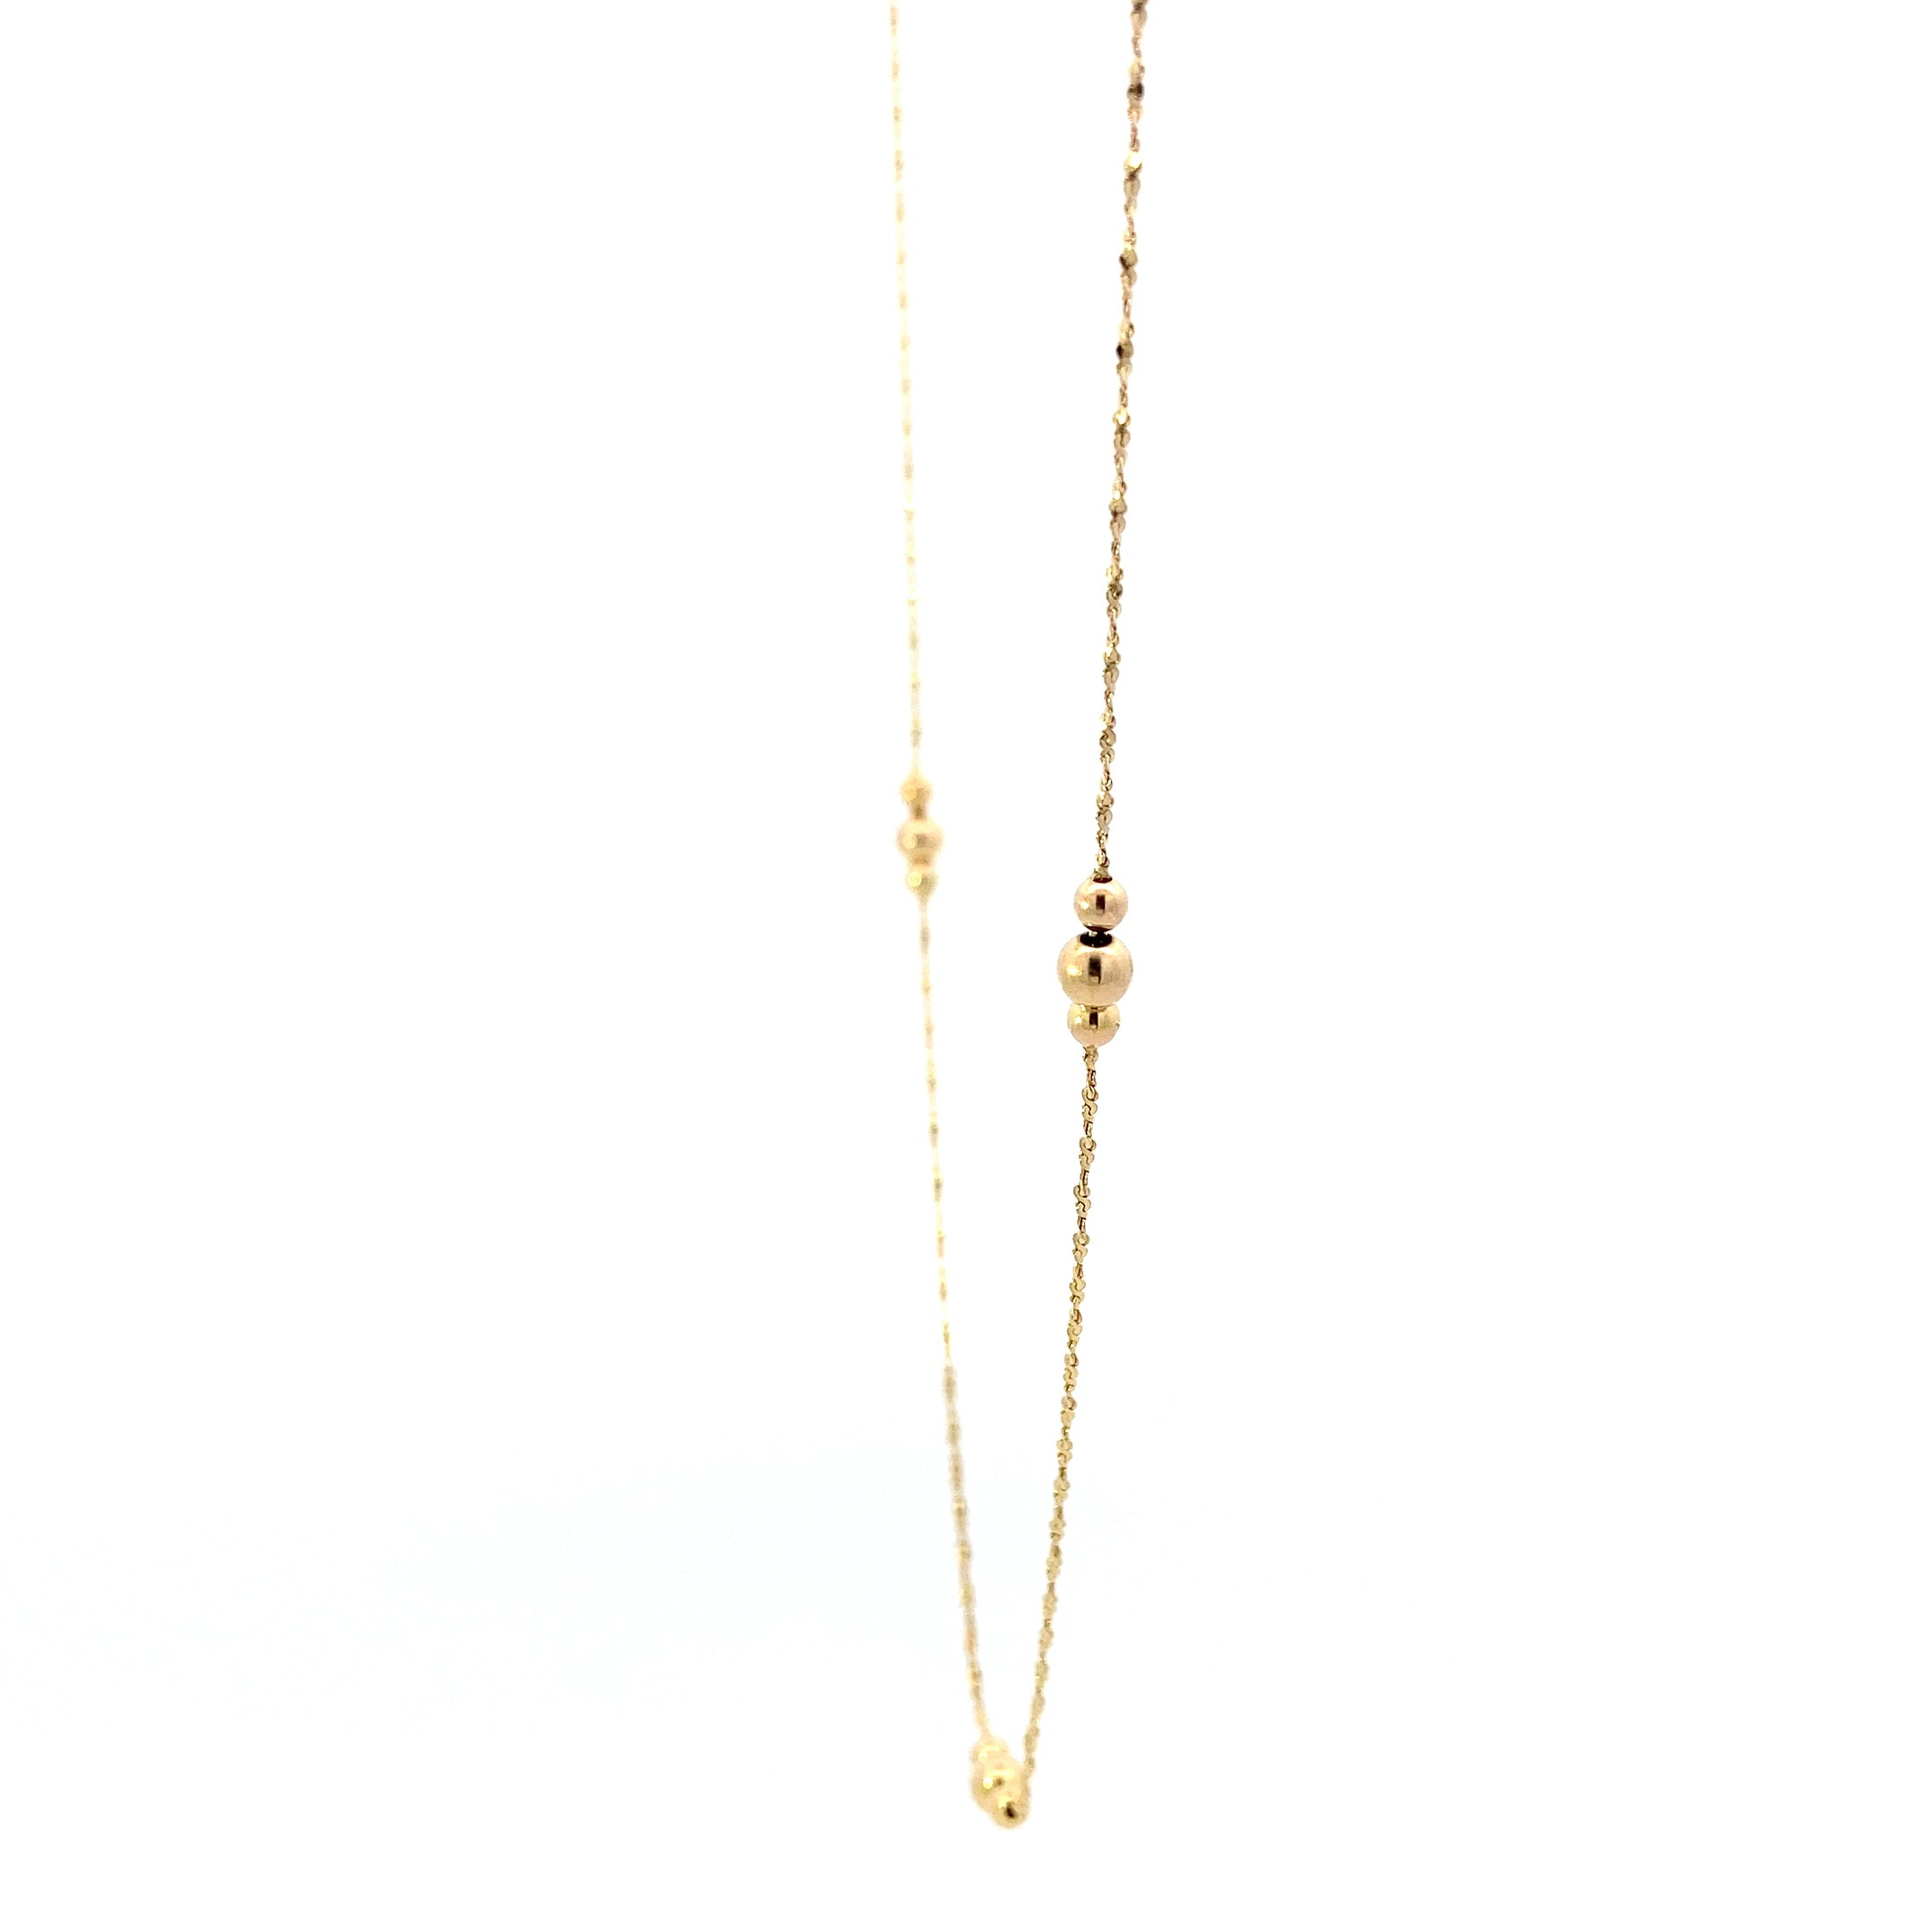 14K Yellow Gold Beaded Twisted Serpentine Chain